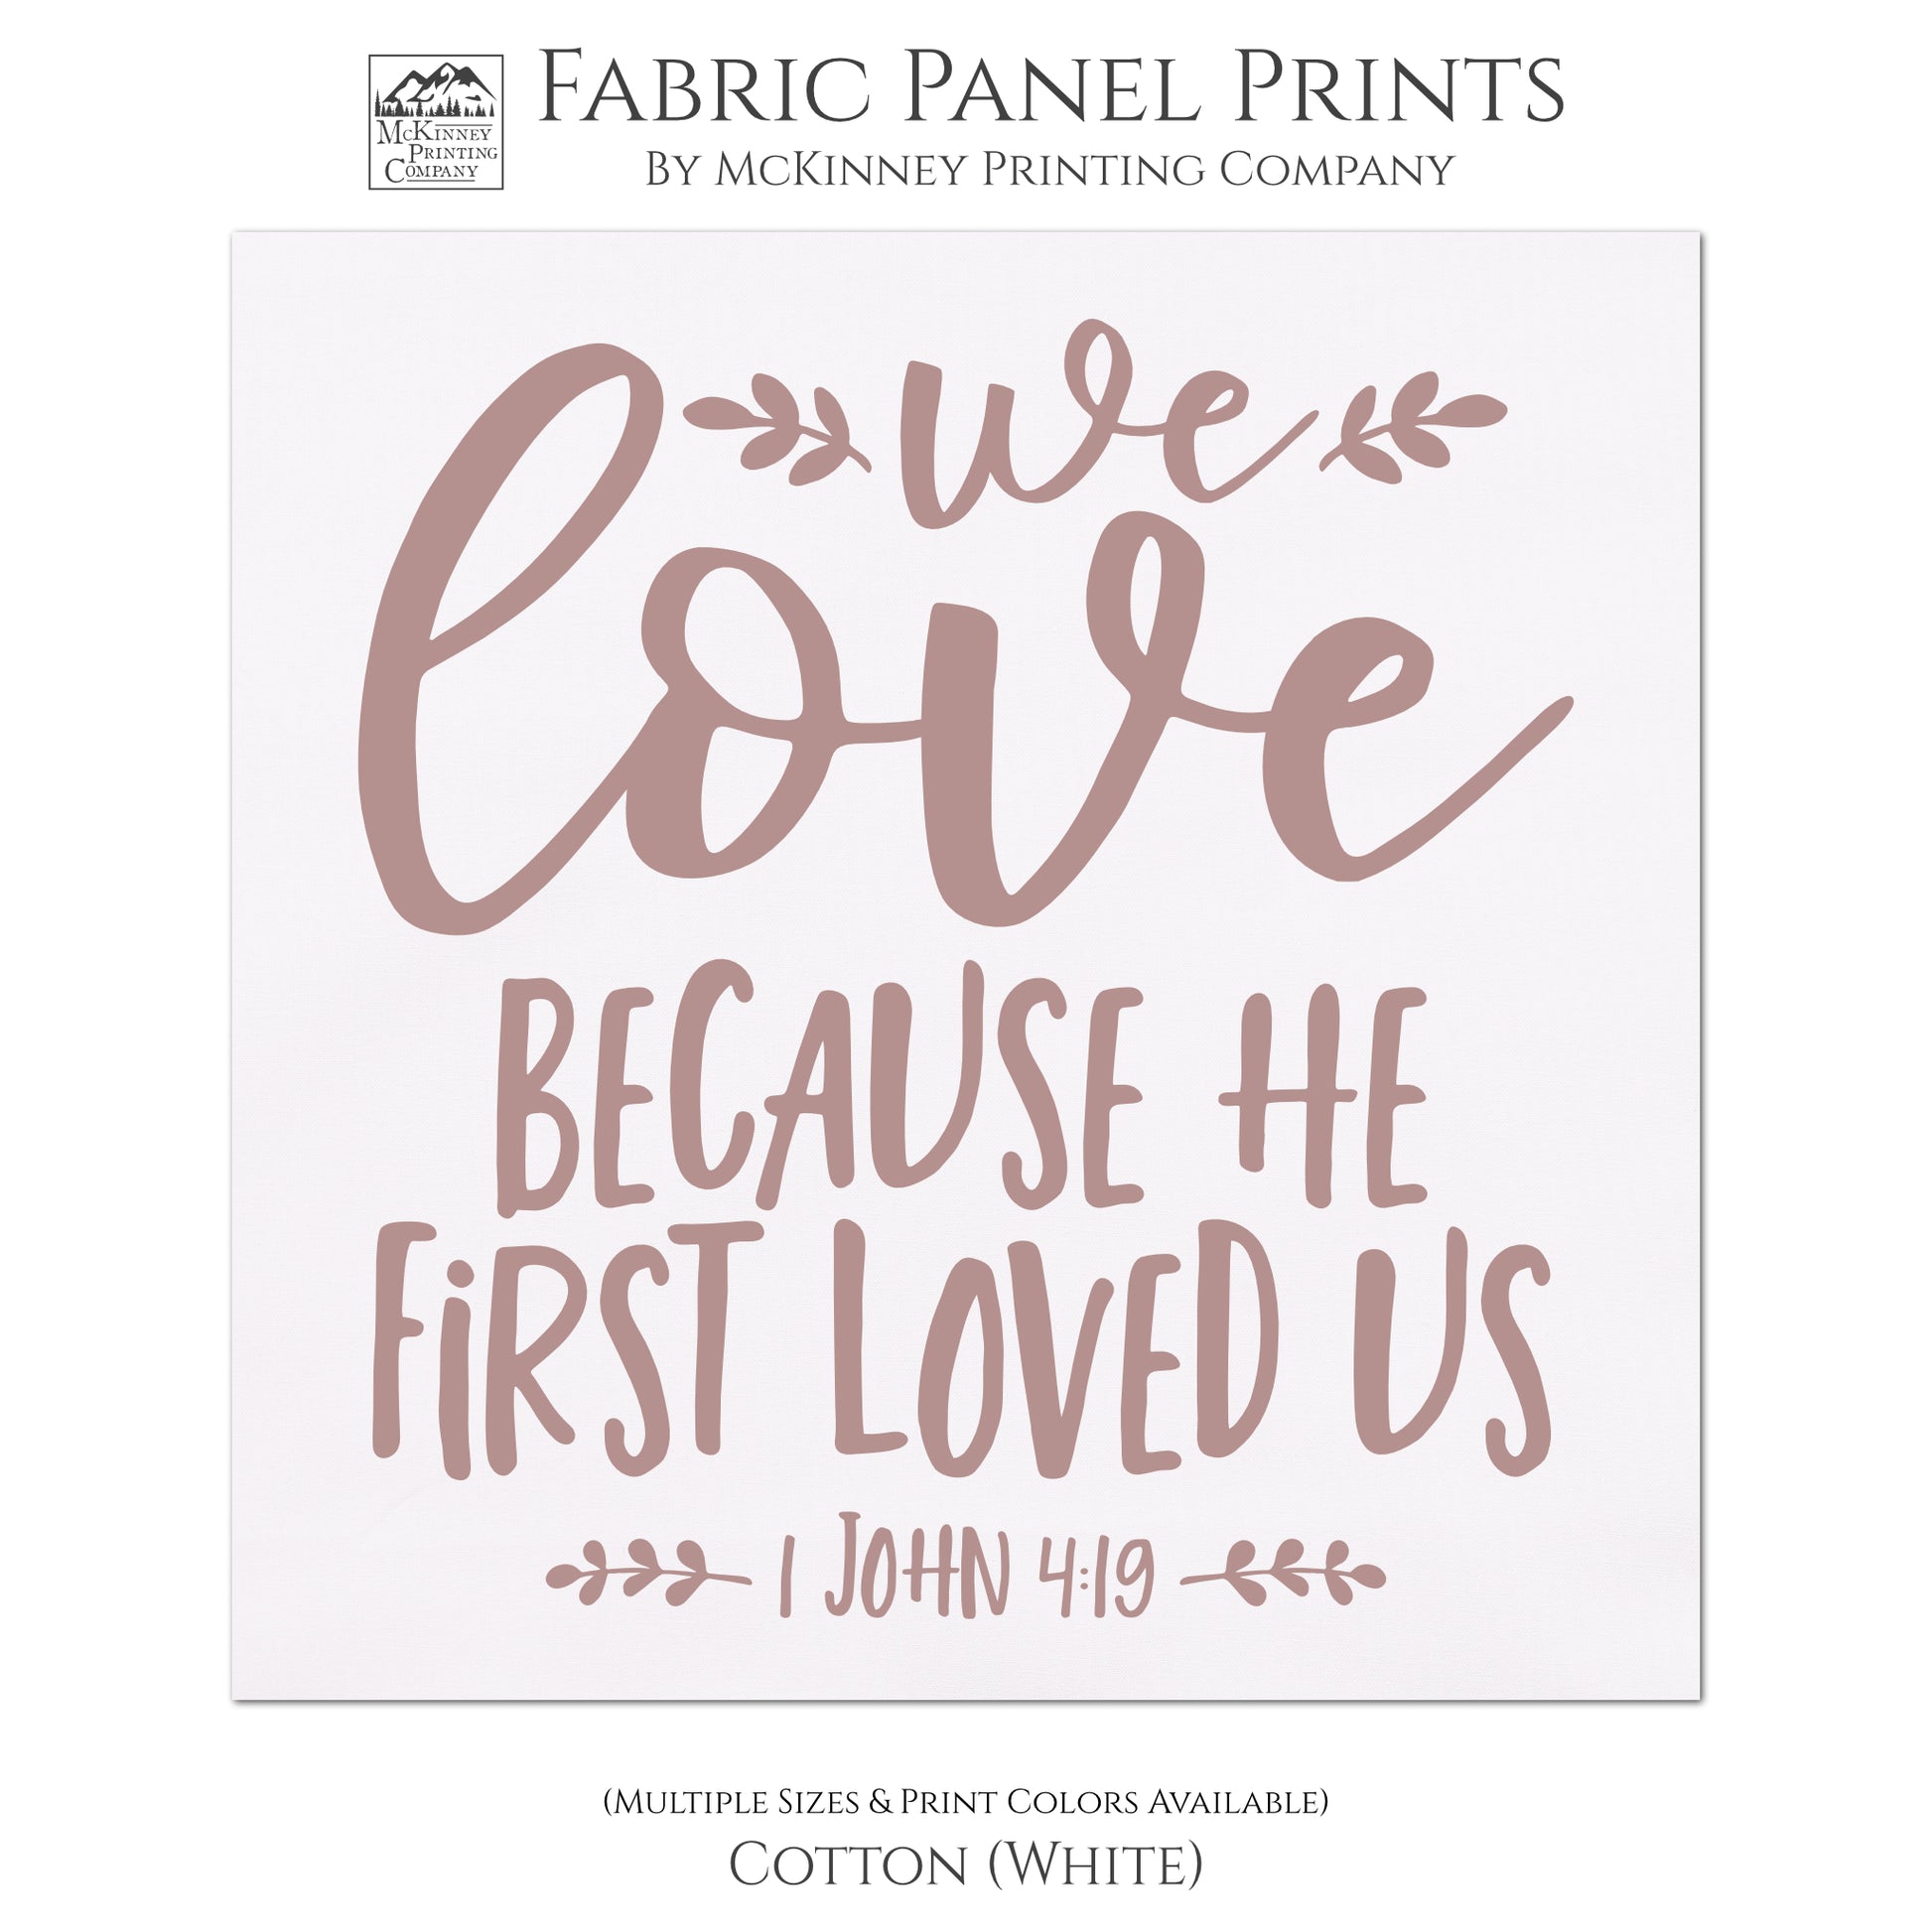 1 John 4:19, We love because he first loved us - Fabric Panel Print for Quilting, Sewing or Wall Art - Cotton, White